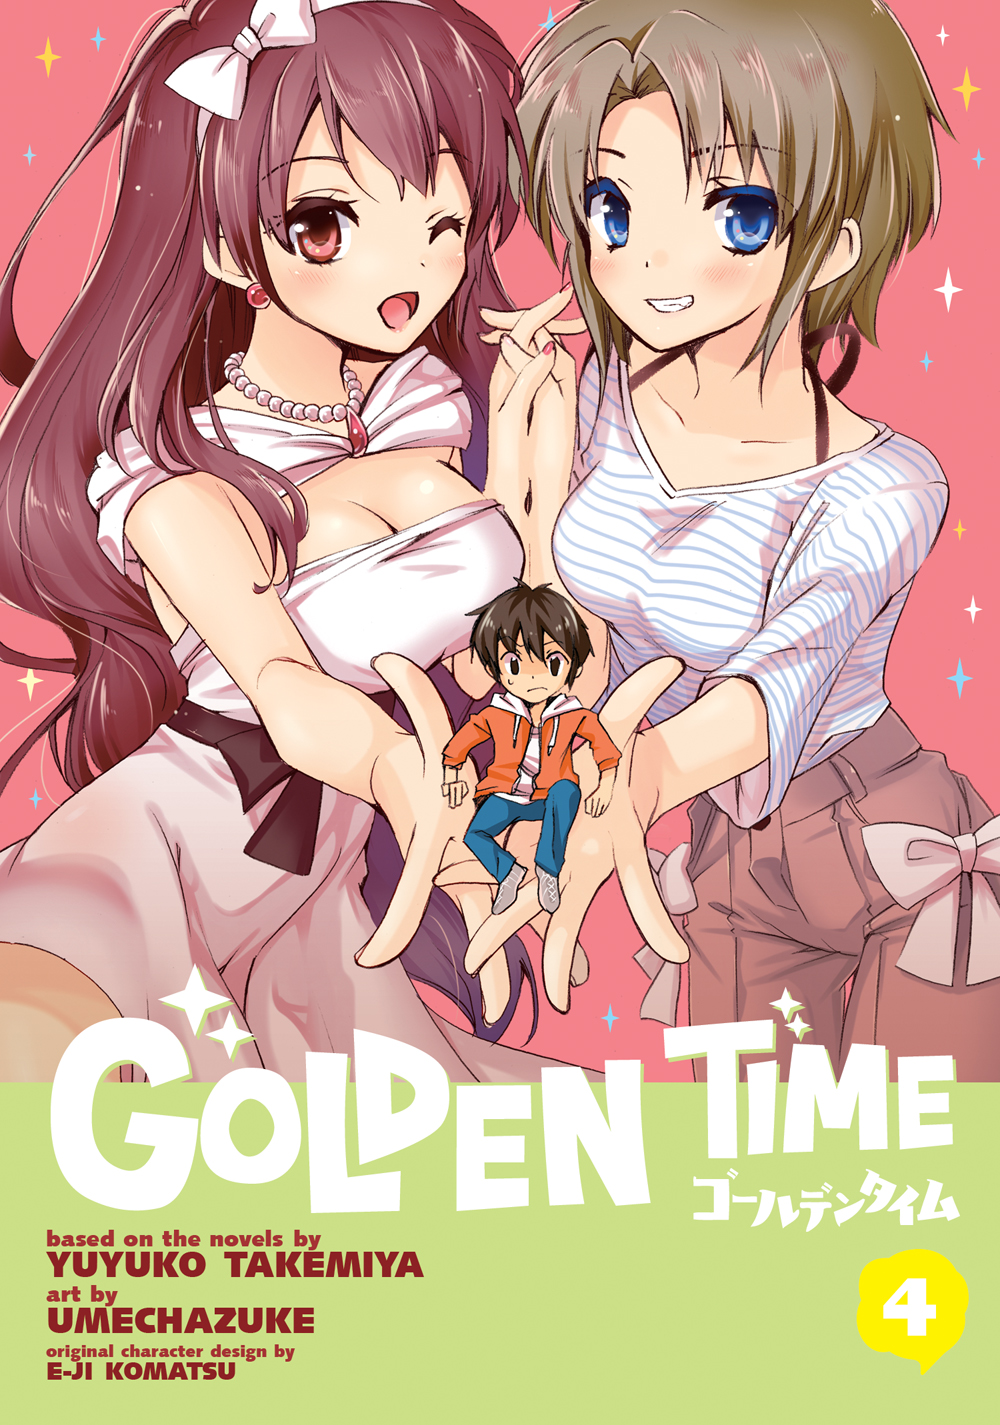 Golden Time: A University story with a hint of Romance, comedy, and maybe  more